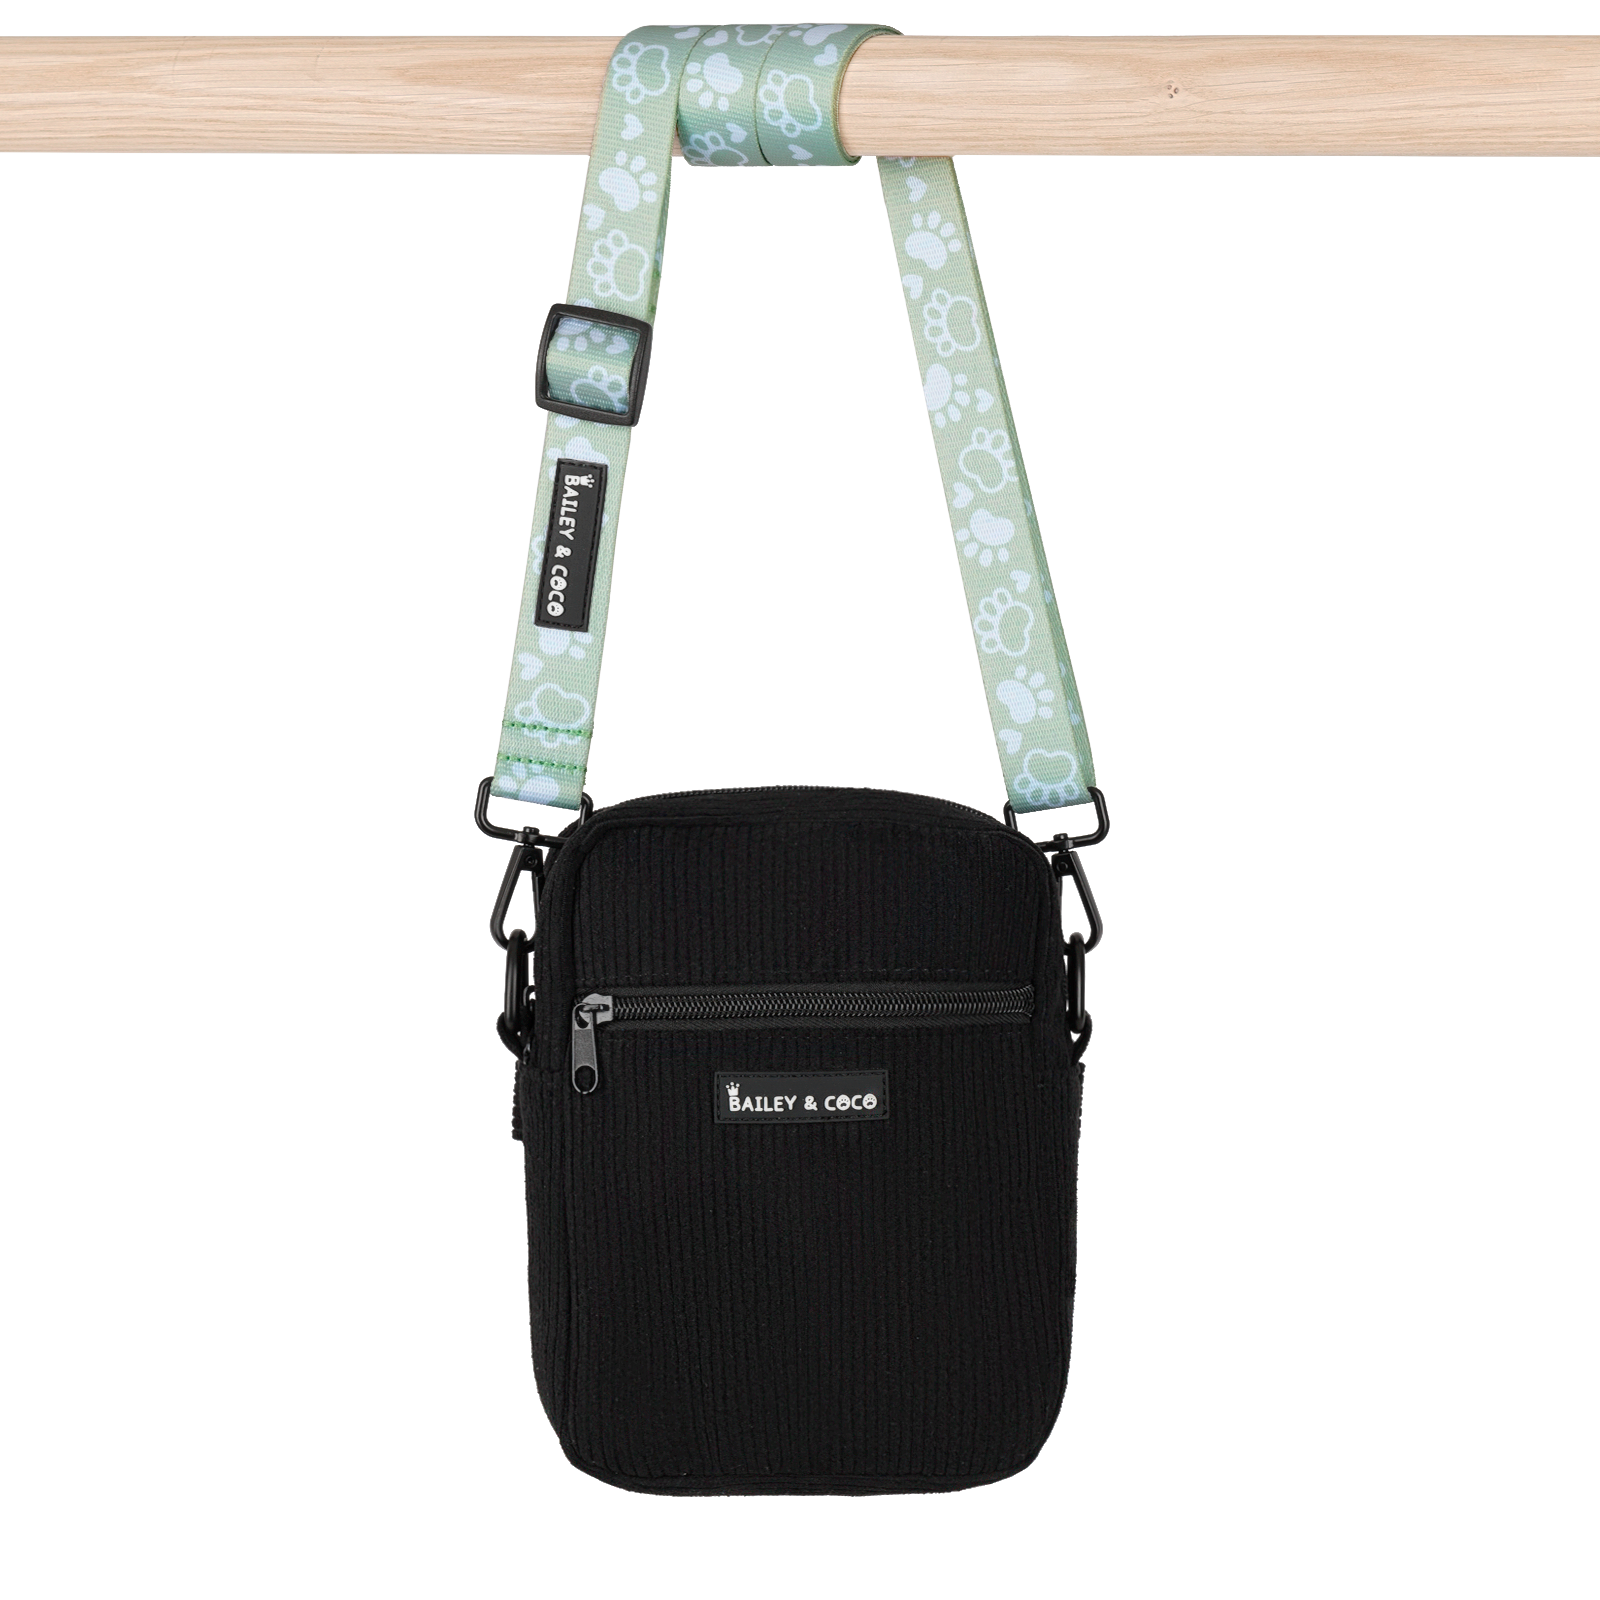 Dog Walking Bag With Peppermint Paws Strap - Black.